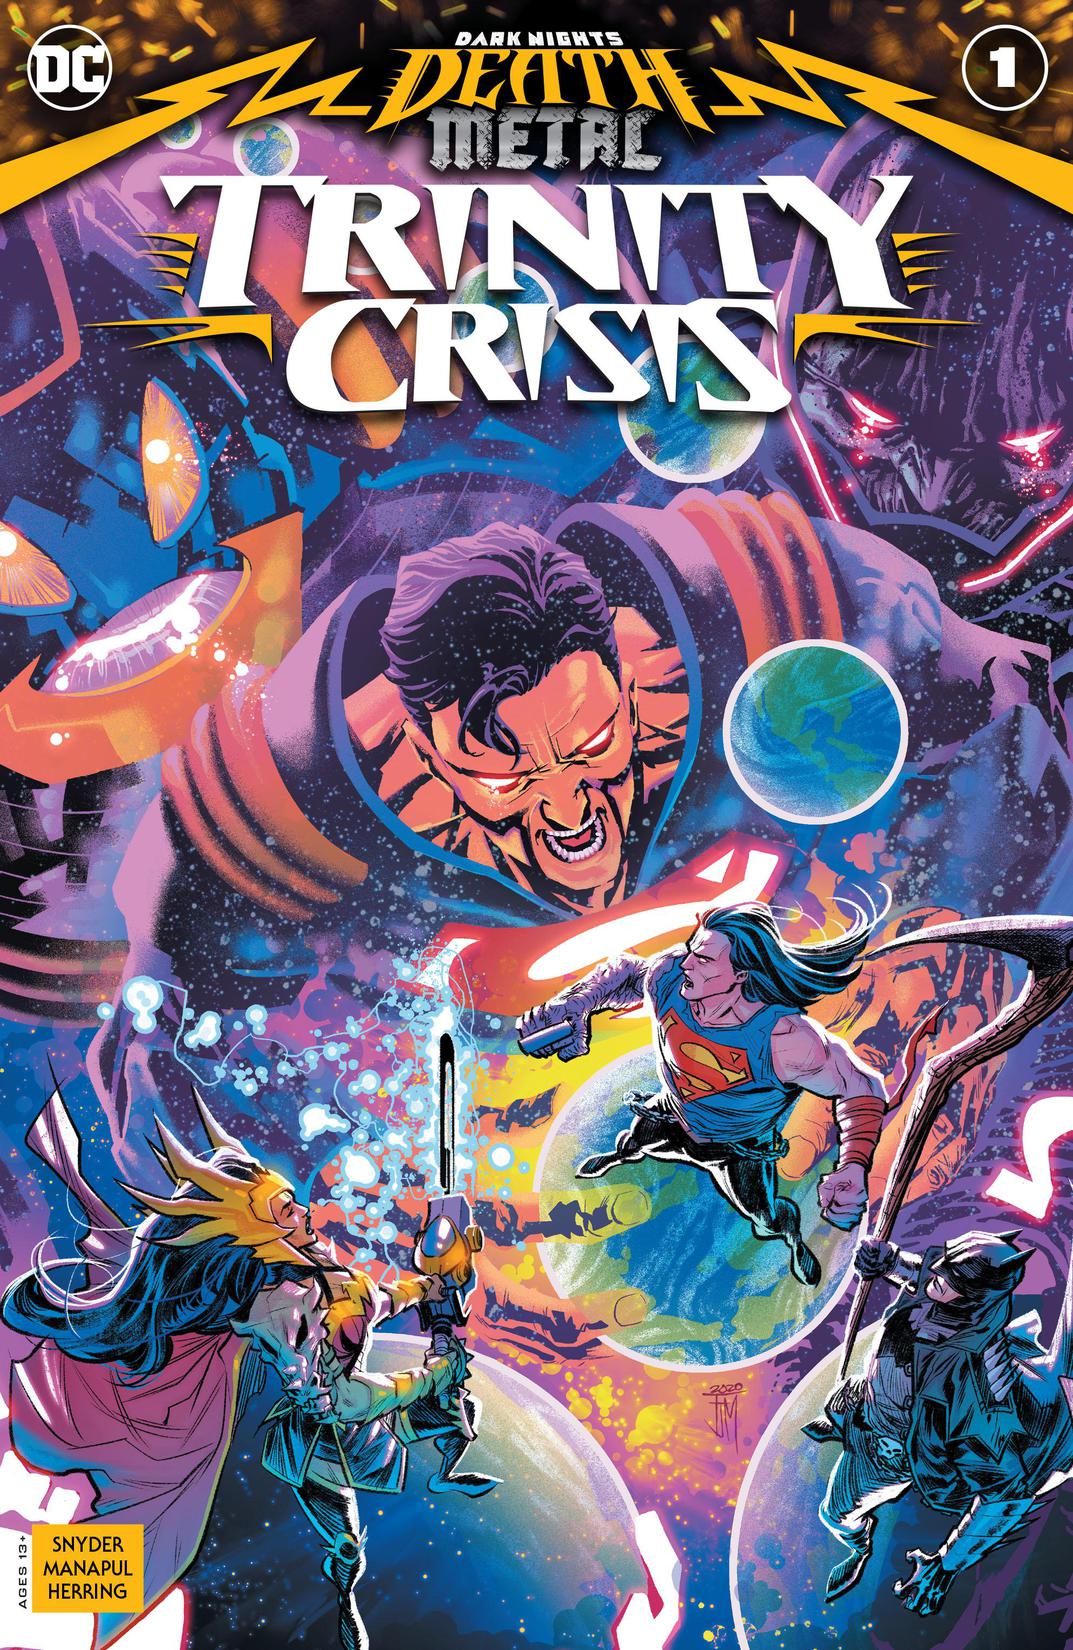 Dark Nights: Death Metal Trinity Crisis #1 preview images